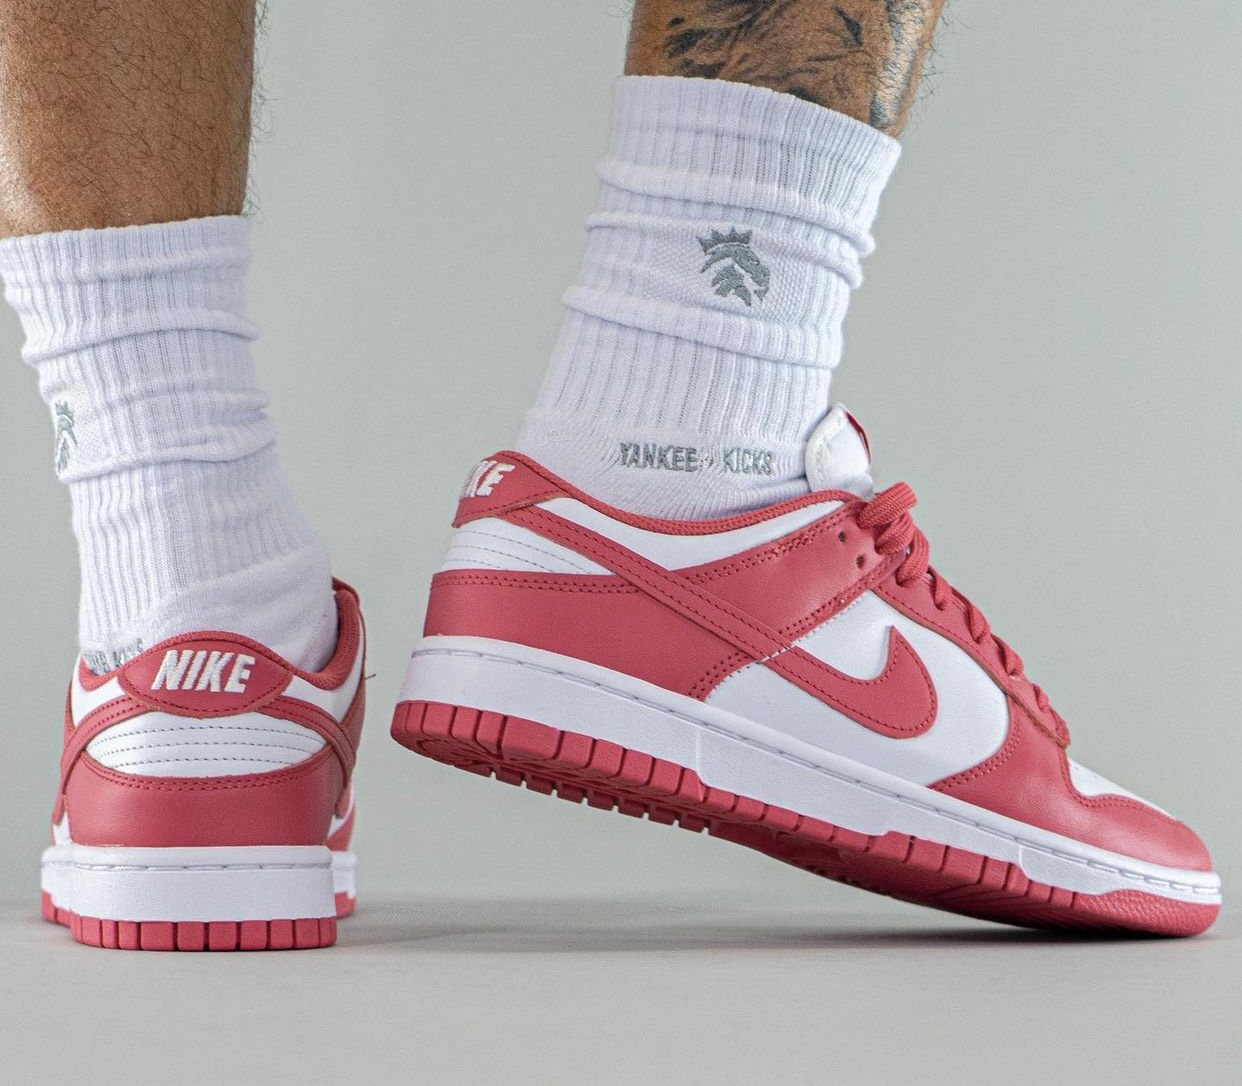 Nike Dunk Low Archeo Pink White DD1503-111 Release Date